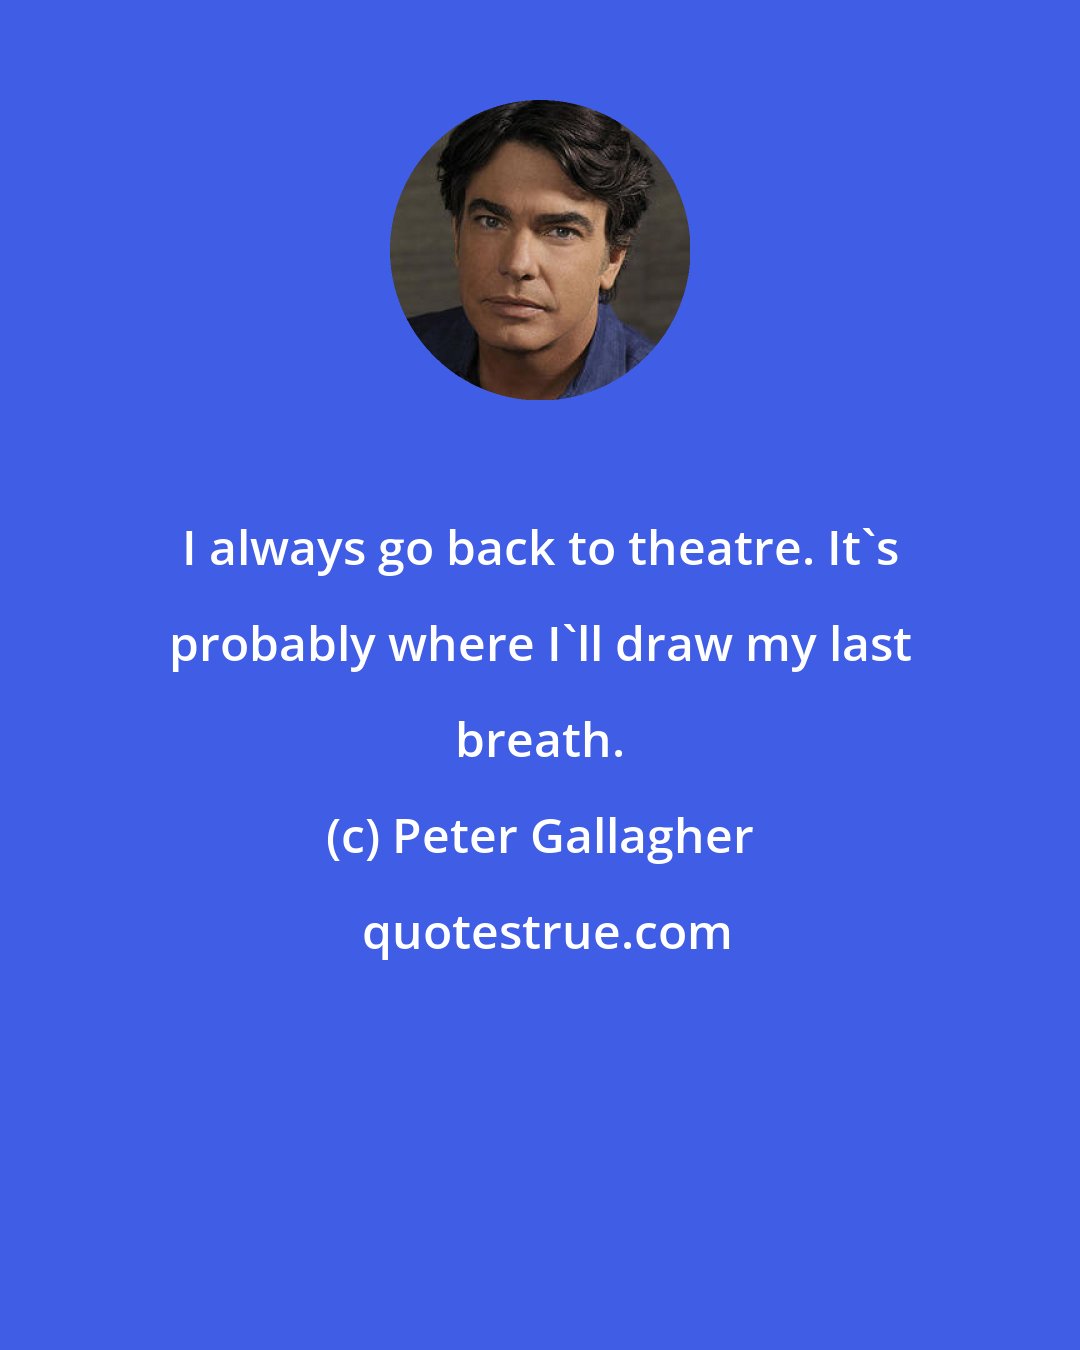 Peter Gallagher: I always go back to theatre. It's probably where I'll draw my last breath.